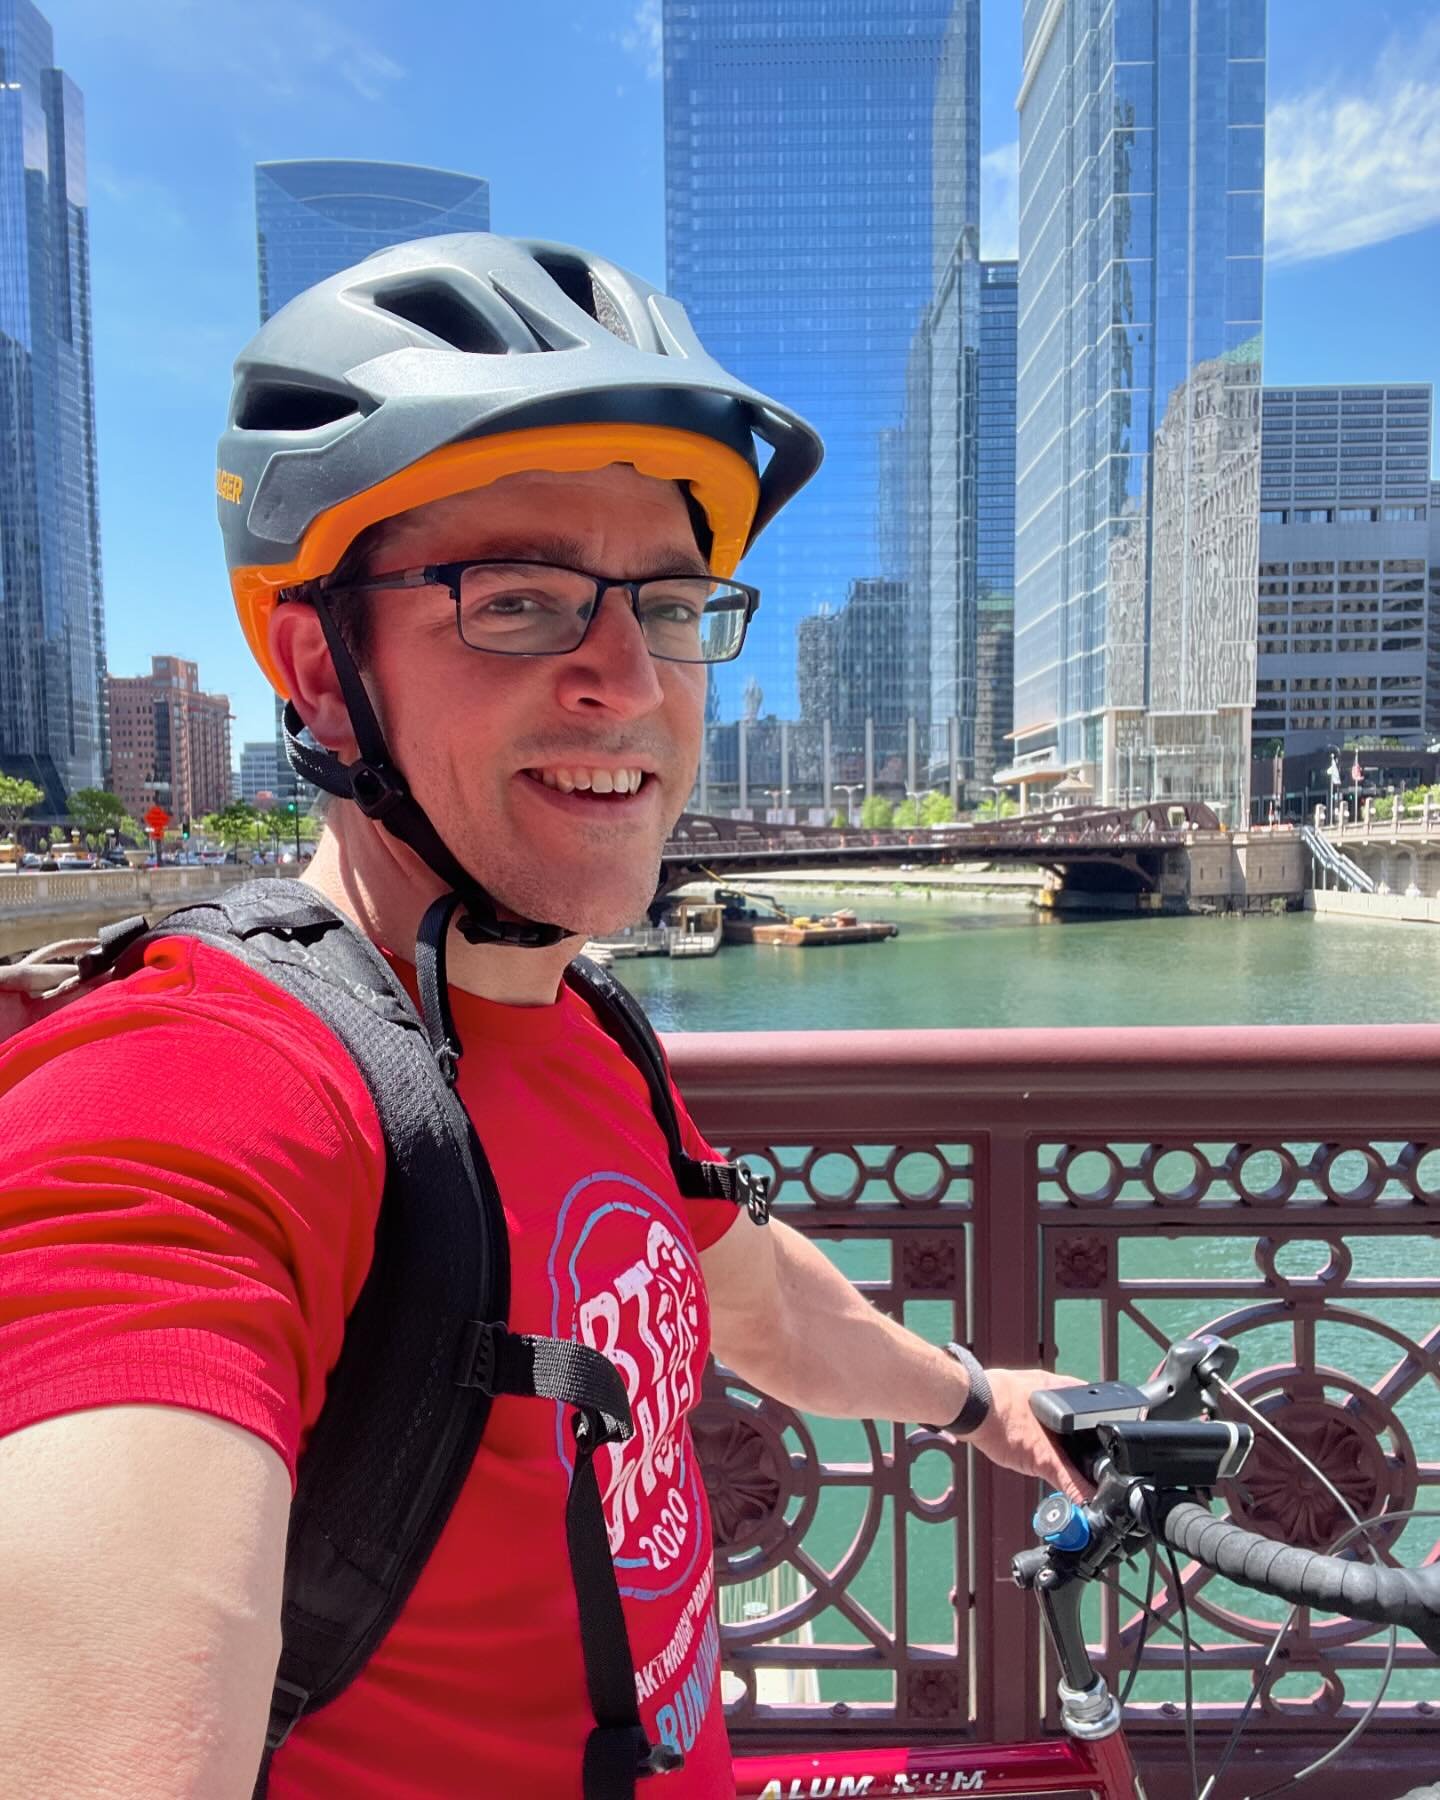 It was a great day for a bike ride in the city. I&rsquo;m grateful to have some movement built in to my day just to get to work. It&rsquo;s important to hit the gym and the weights in your favorite HIIT class but having some low intensity movement is